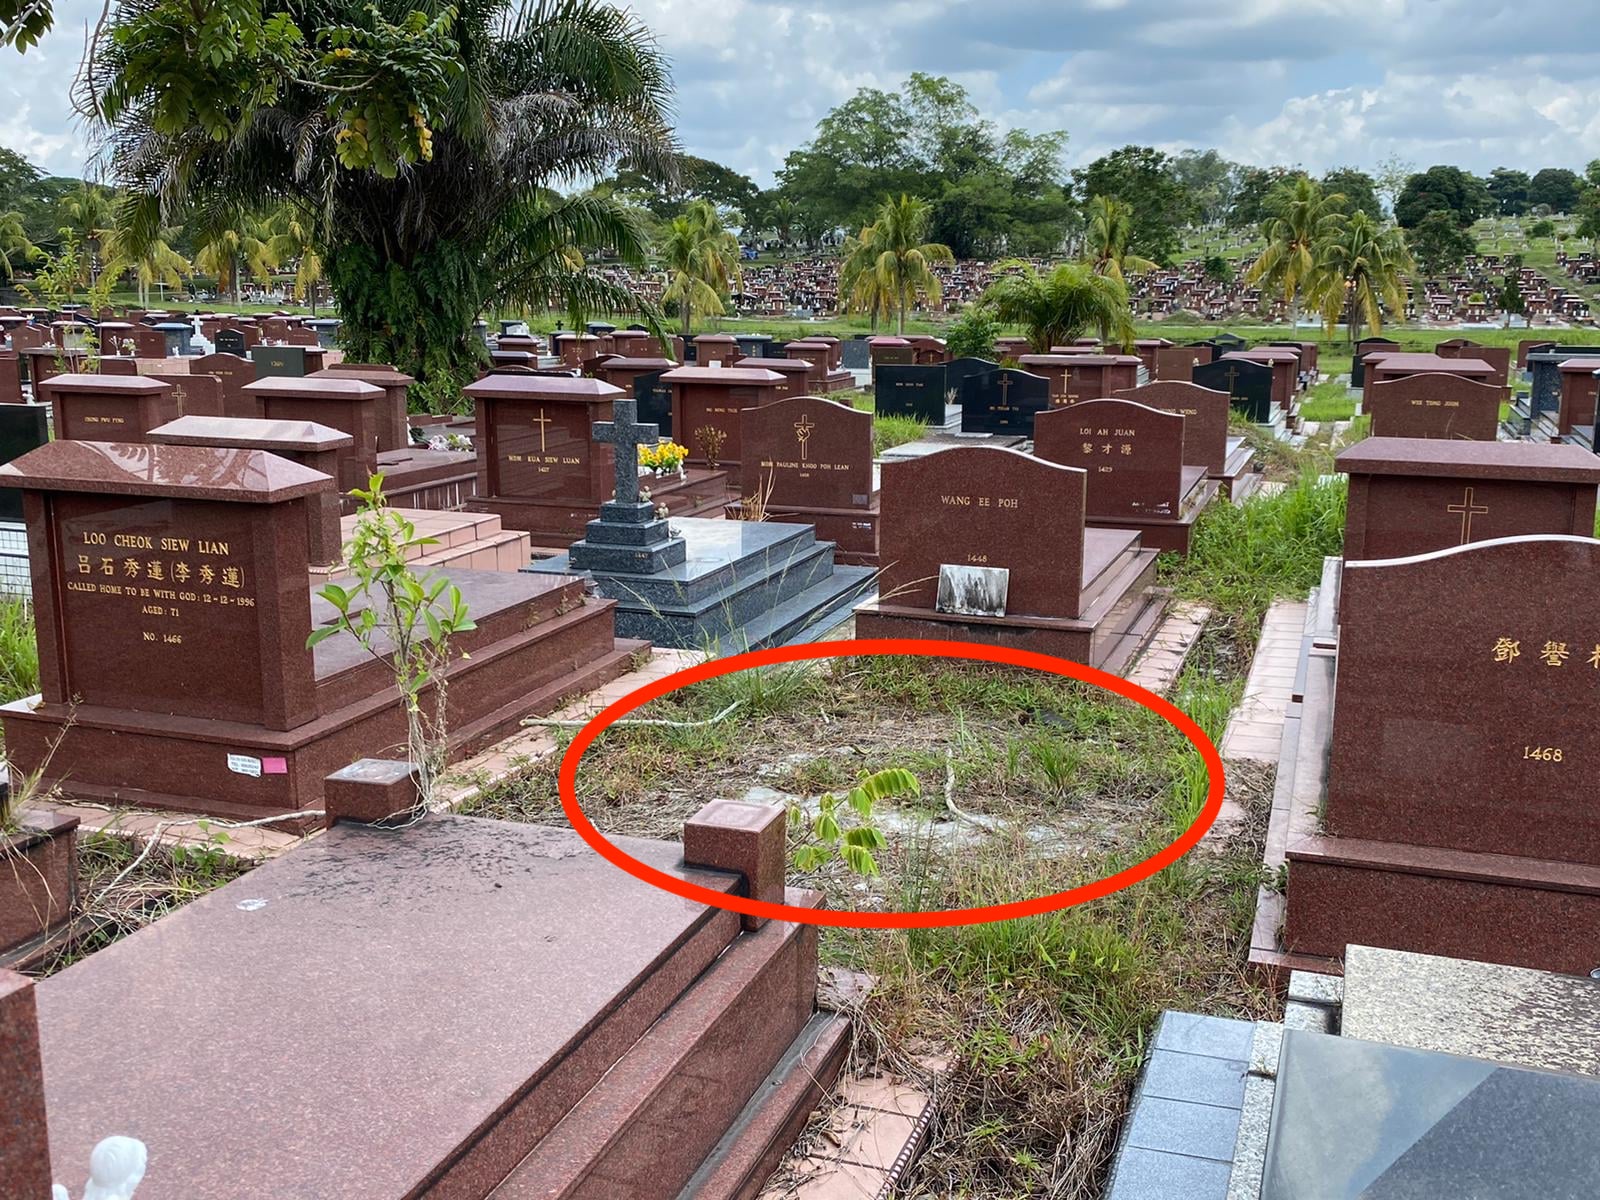 Image of Chong Siew Hong's unmarked grave